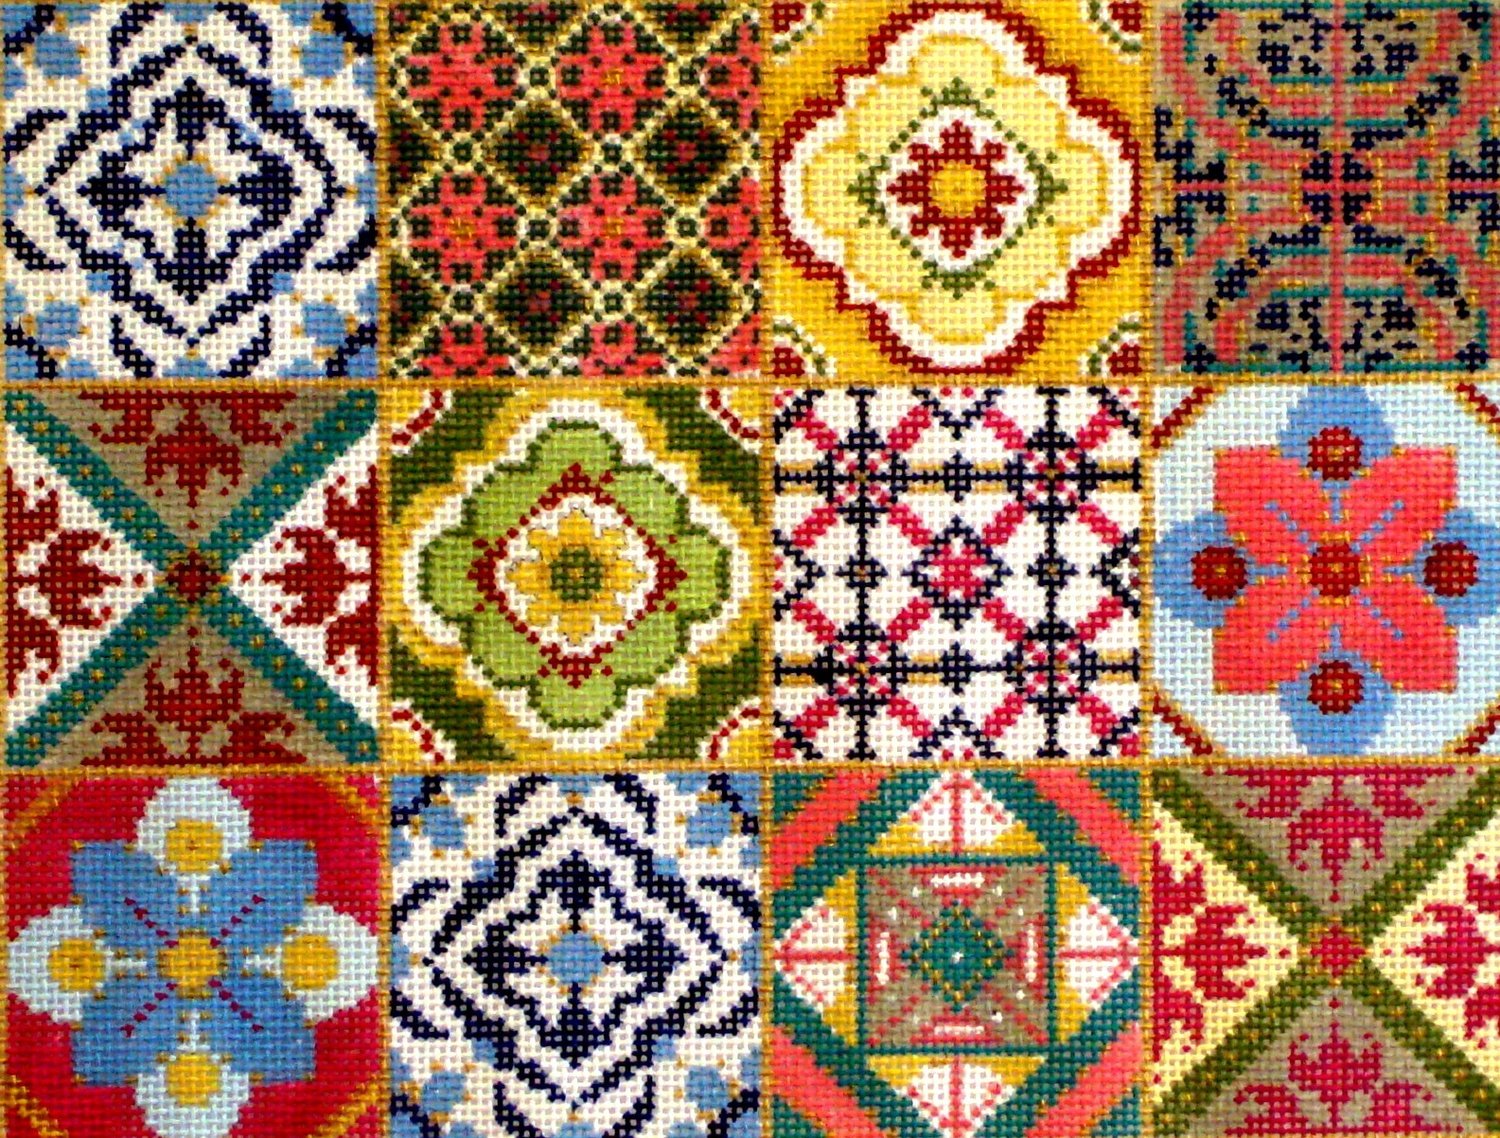 12 Square Patchwork  (handpainted by Alice Peterson)